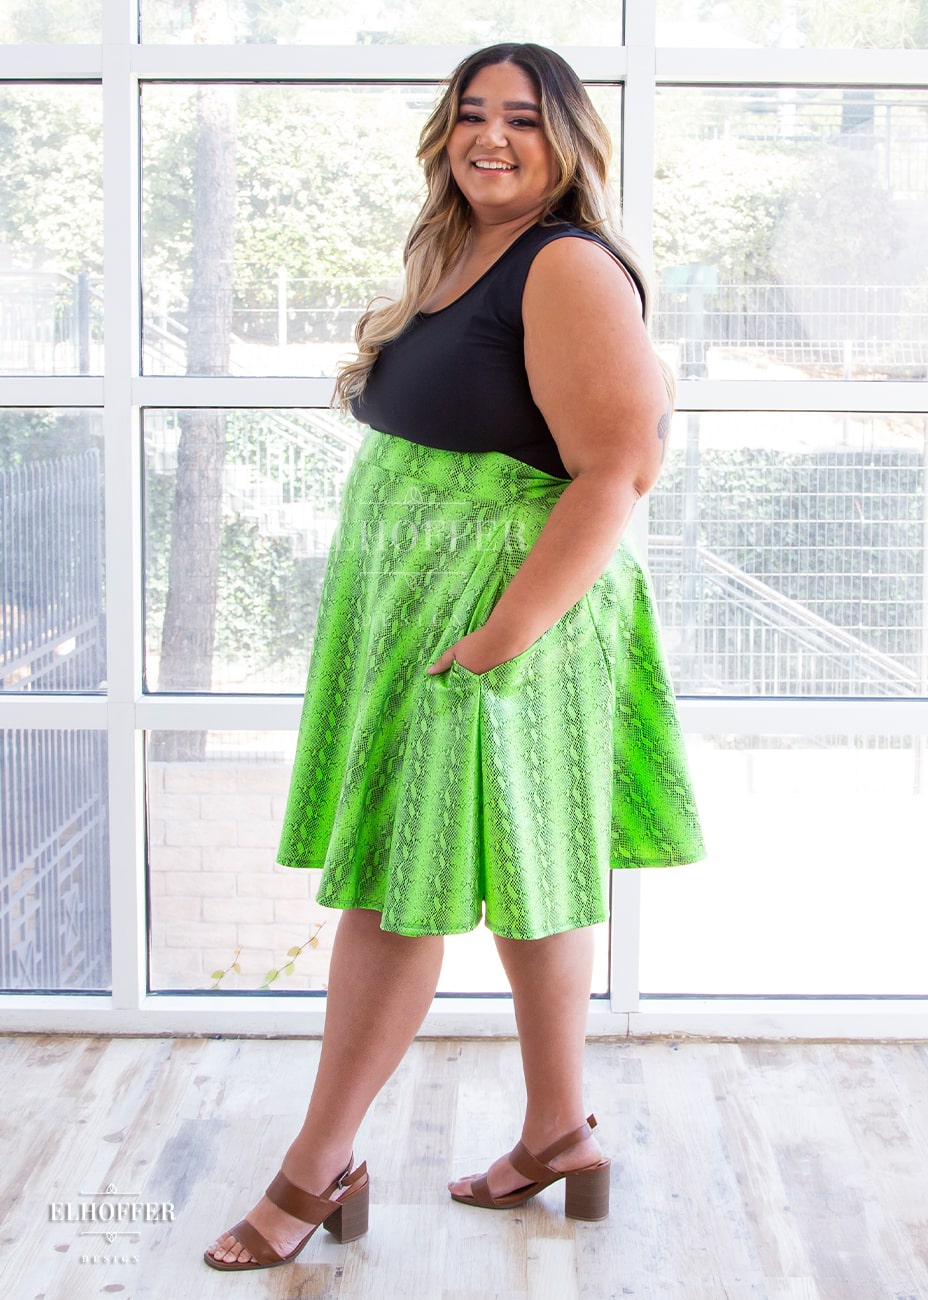 Cori, a medium skinned size 2XL model with brunette and blonde ombre hair, wears a high-waisted knee length full skirt with a fitted matching waistband encased with elastic in the croki green print. The croki green print is a lime green snake print. She stands sideways and shows off the big pockets by placing a hand in one.